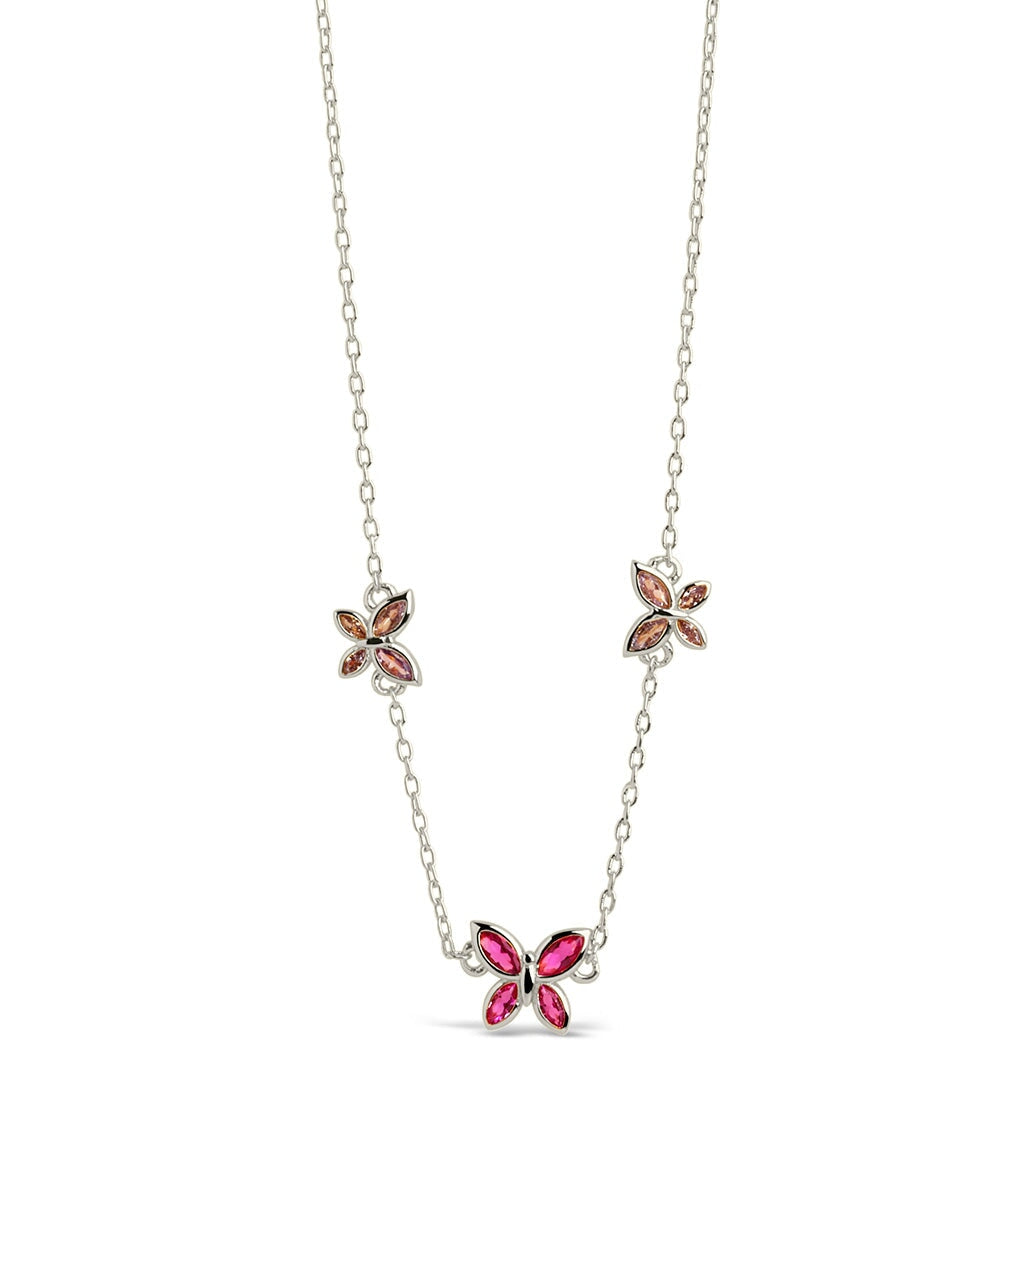 Caria CZ Butterfly Charm Necklace Necklace Sterling Forever Silver 